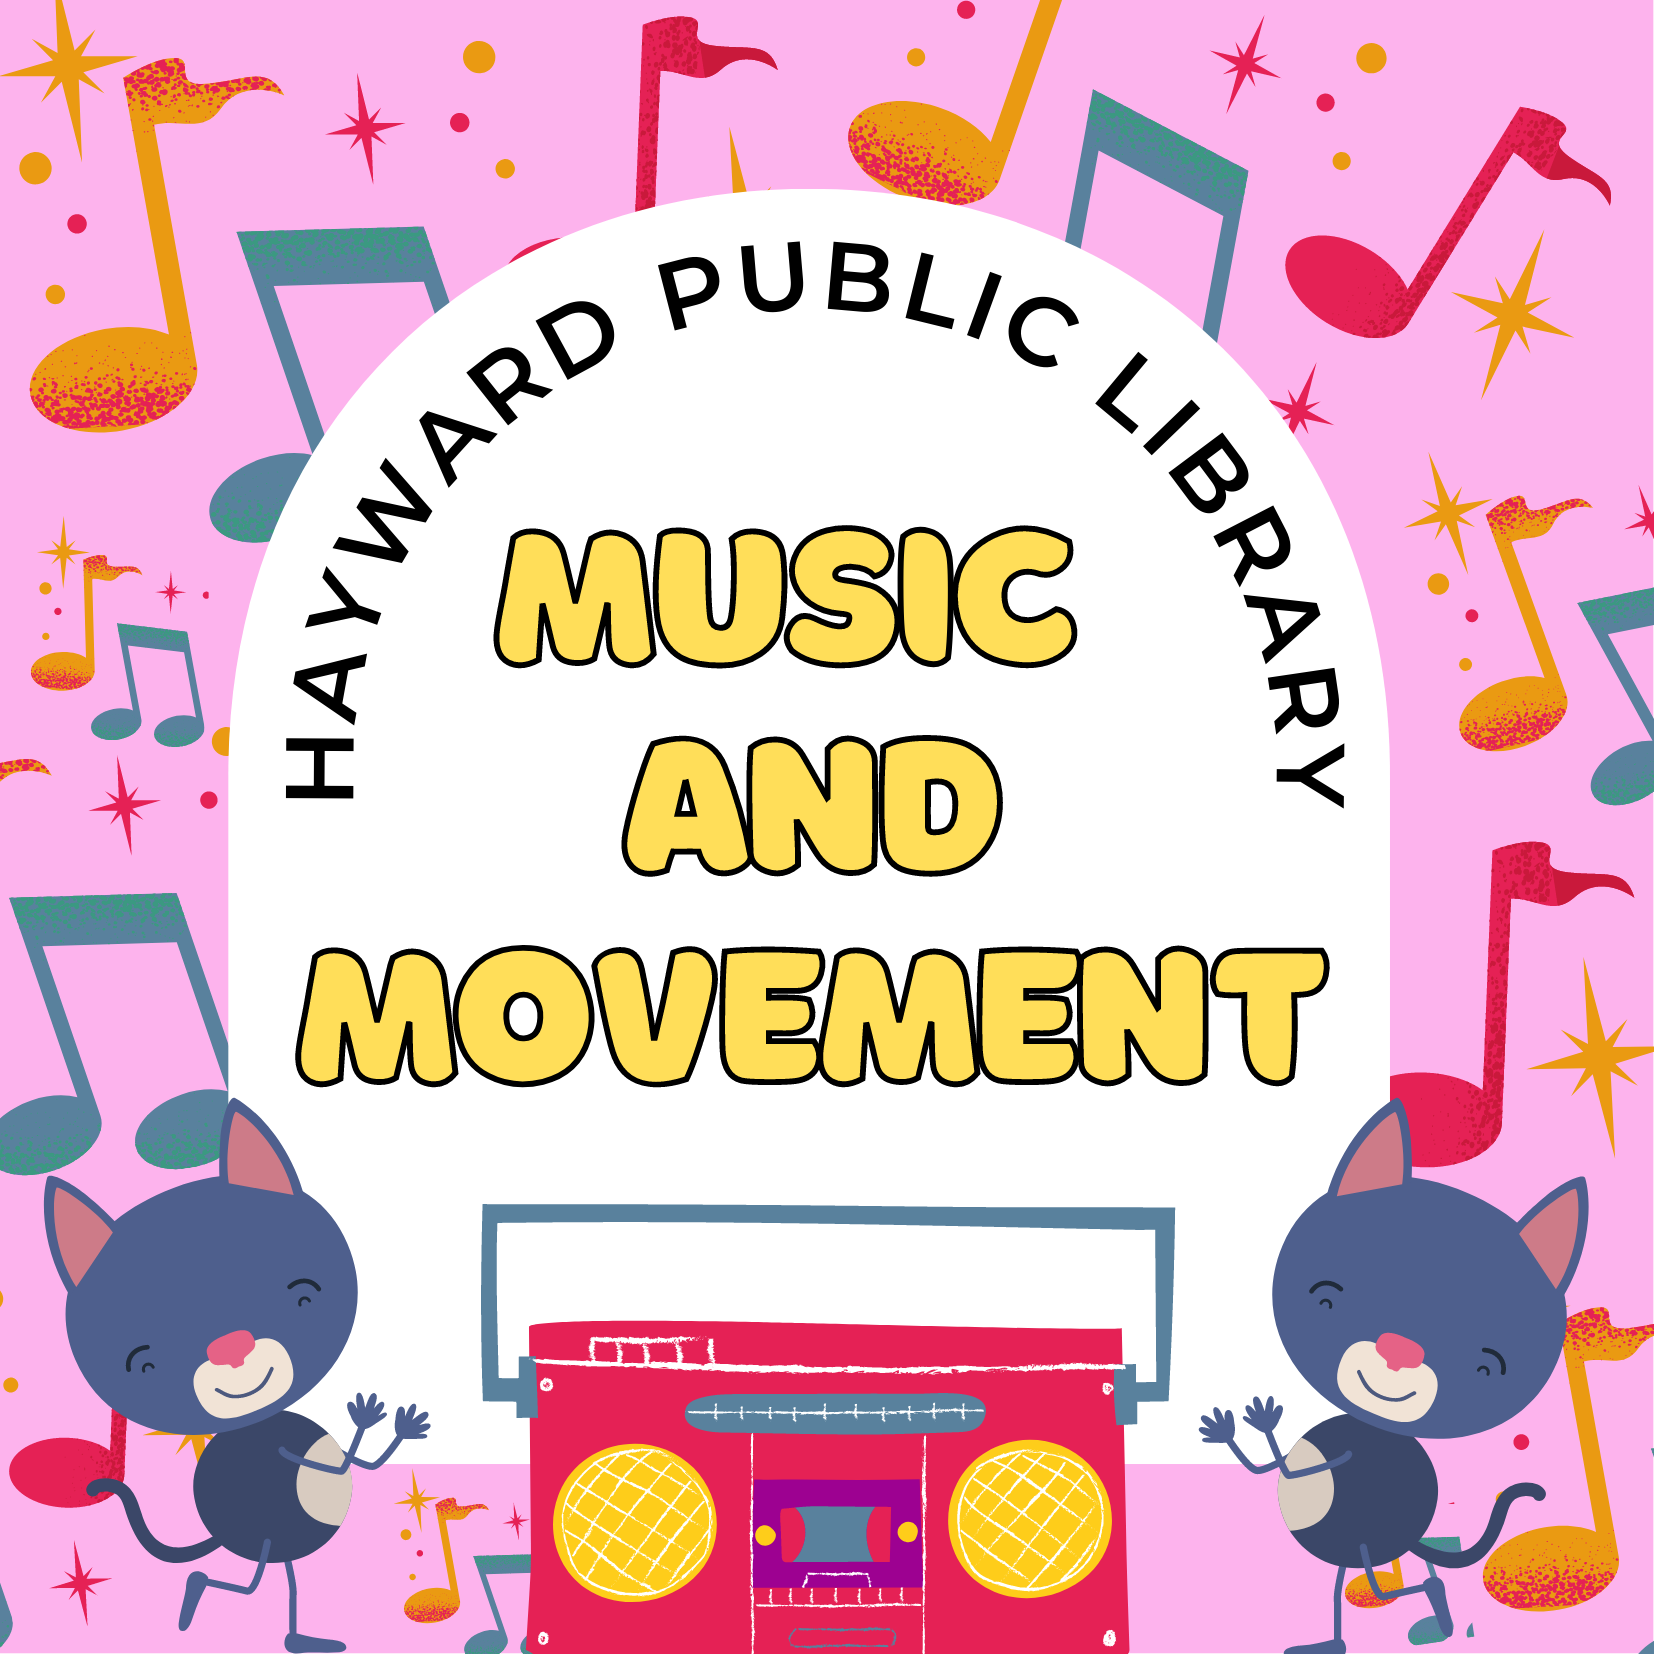 gray cats dancing on the side of dark pink radio. Text is black and yellow, reads hayward public library music and movement 